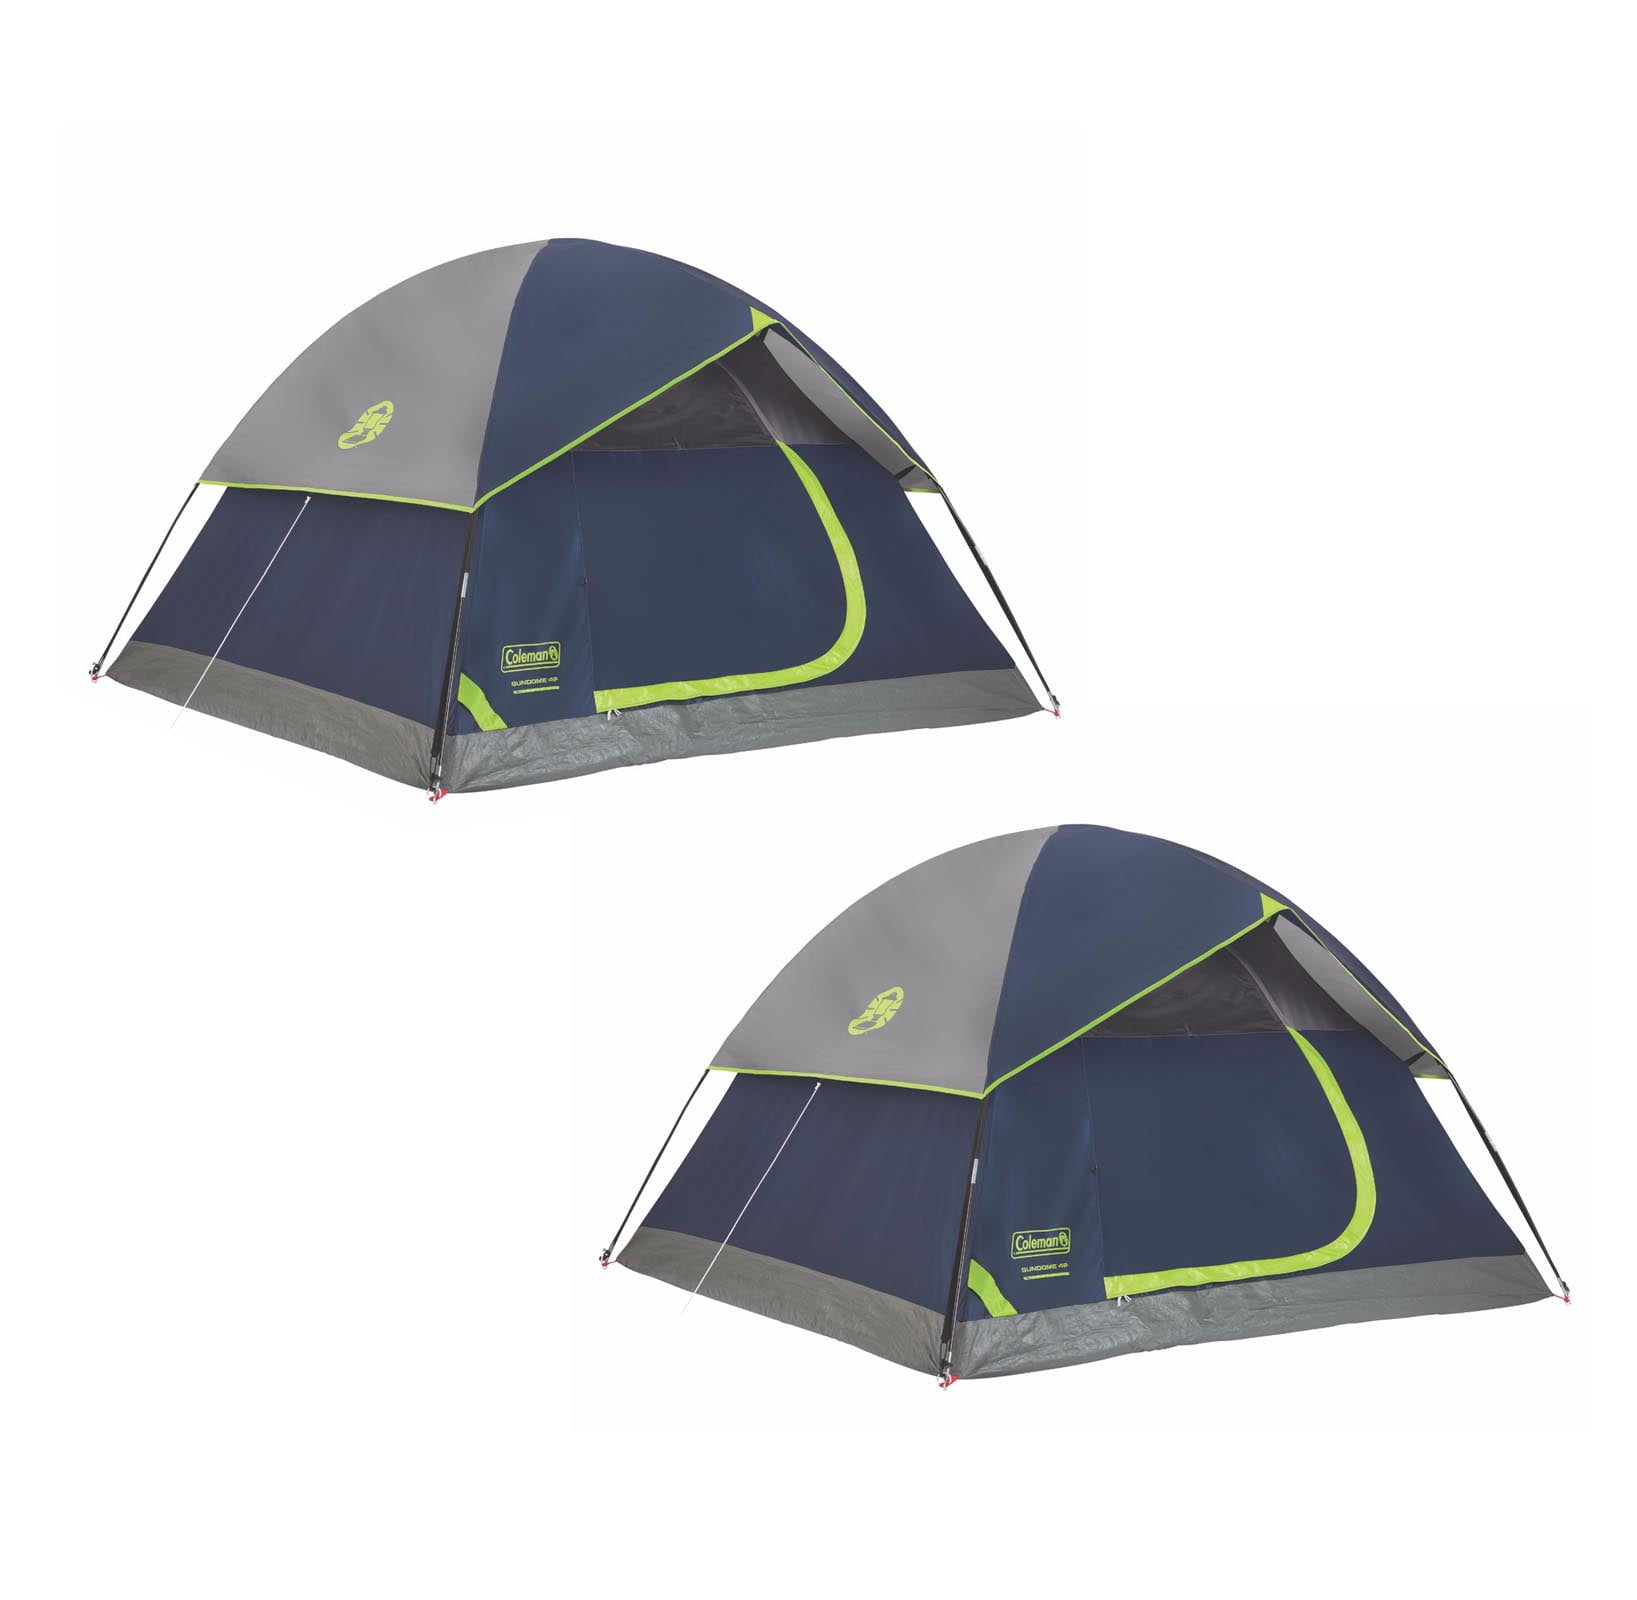 4 Person Outdoor Hiking Camping Tent w/ Rainfly Awning9' x 7' 